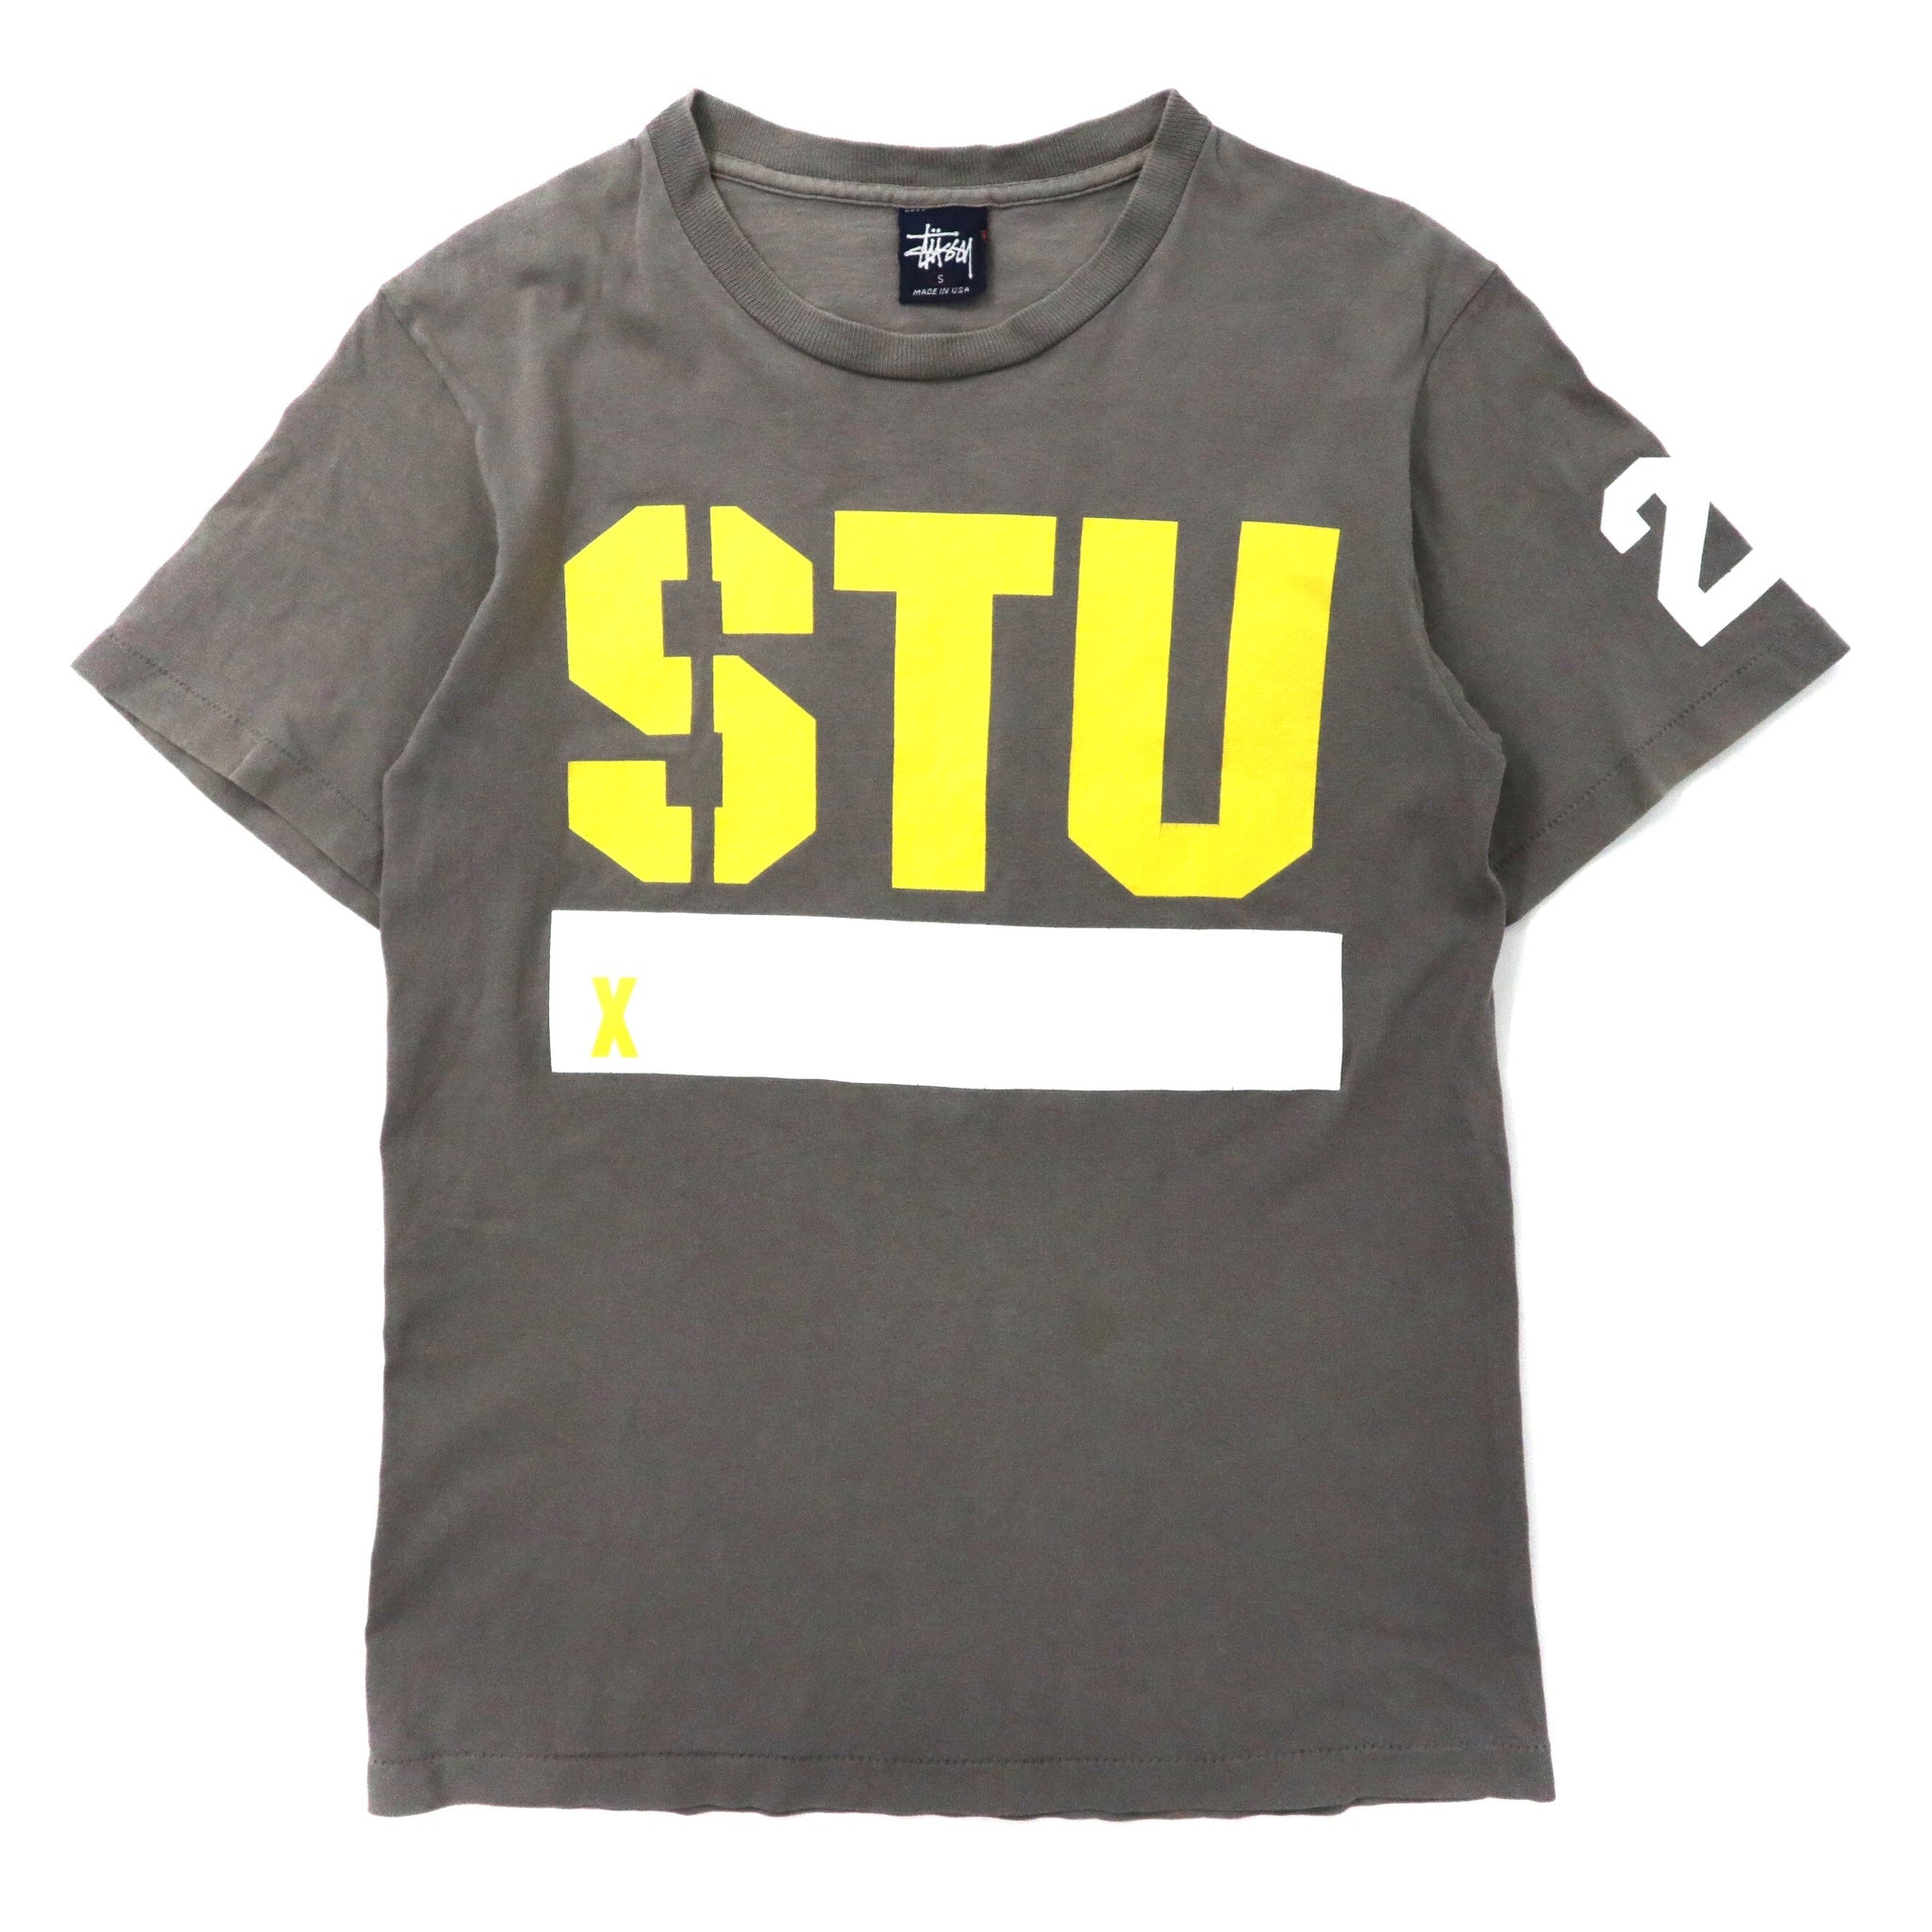 STUSSY Tシャツ MADE IN USA